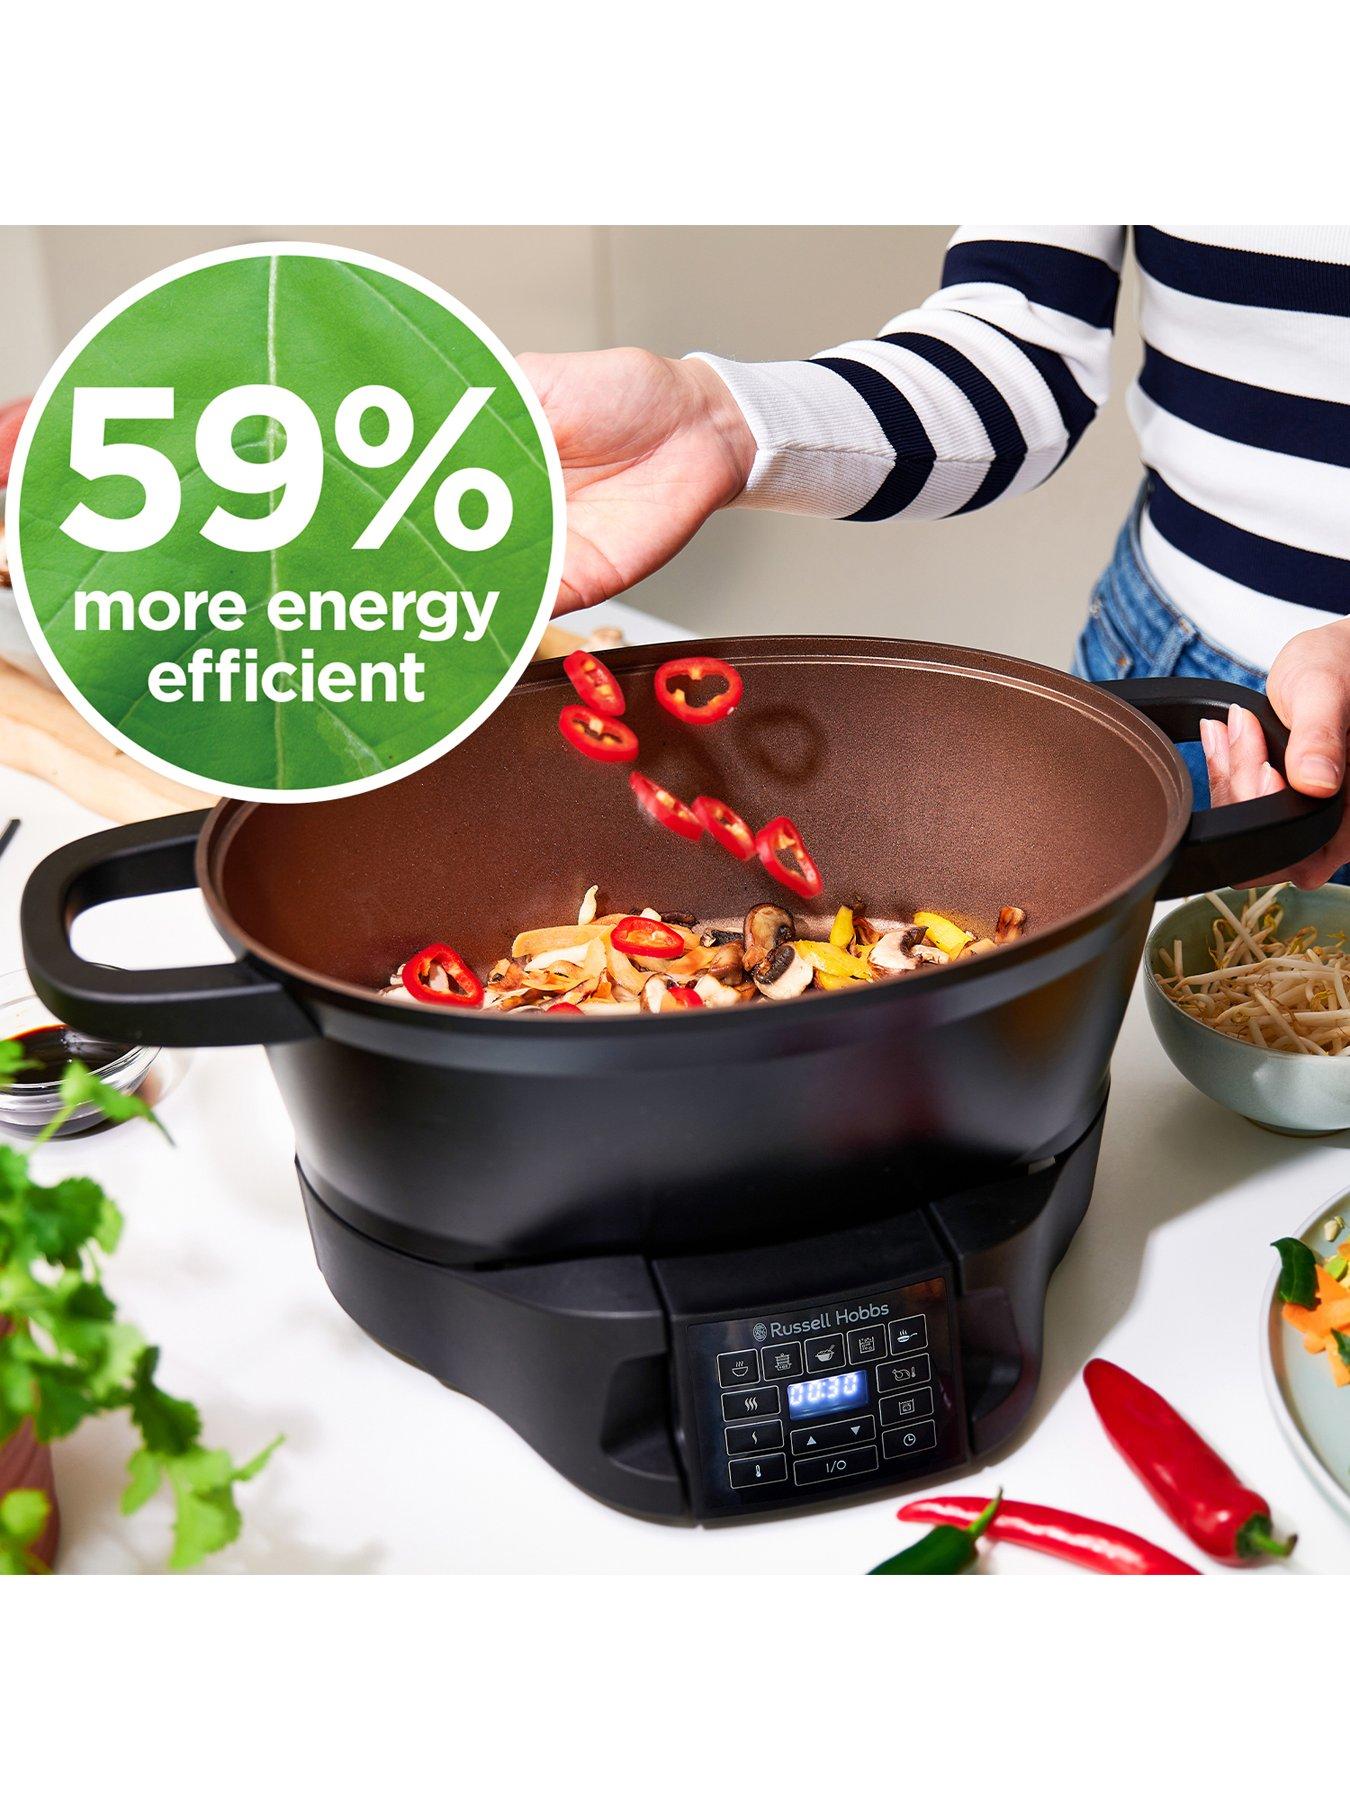 DEAL OF THE DAY: Shoppers love 'energy efficient' Russell Hobbs